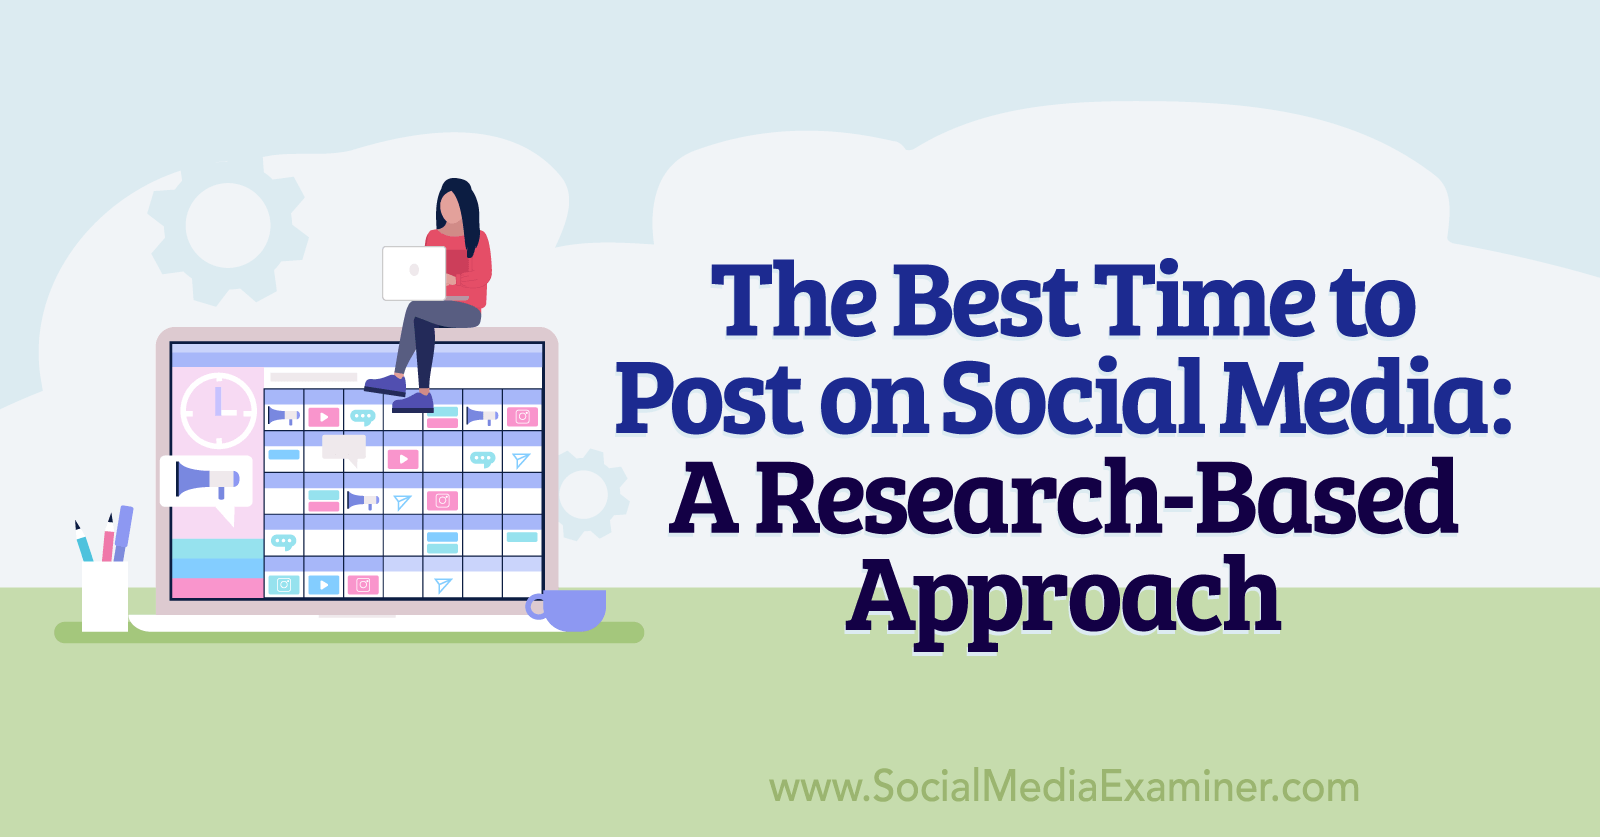 The Best Time to Post on Social Media: A Research-Based Approach by Anna Sonnenberg